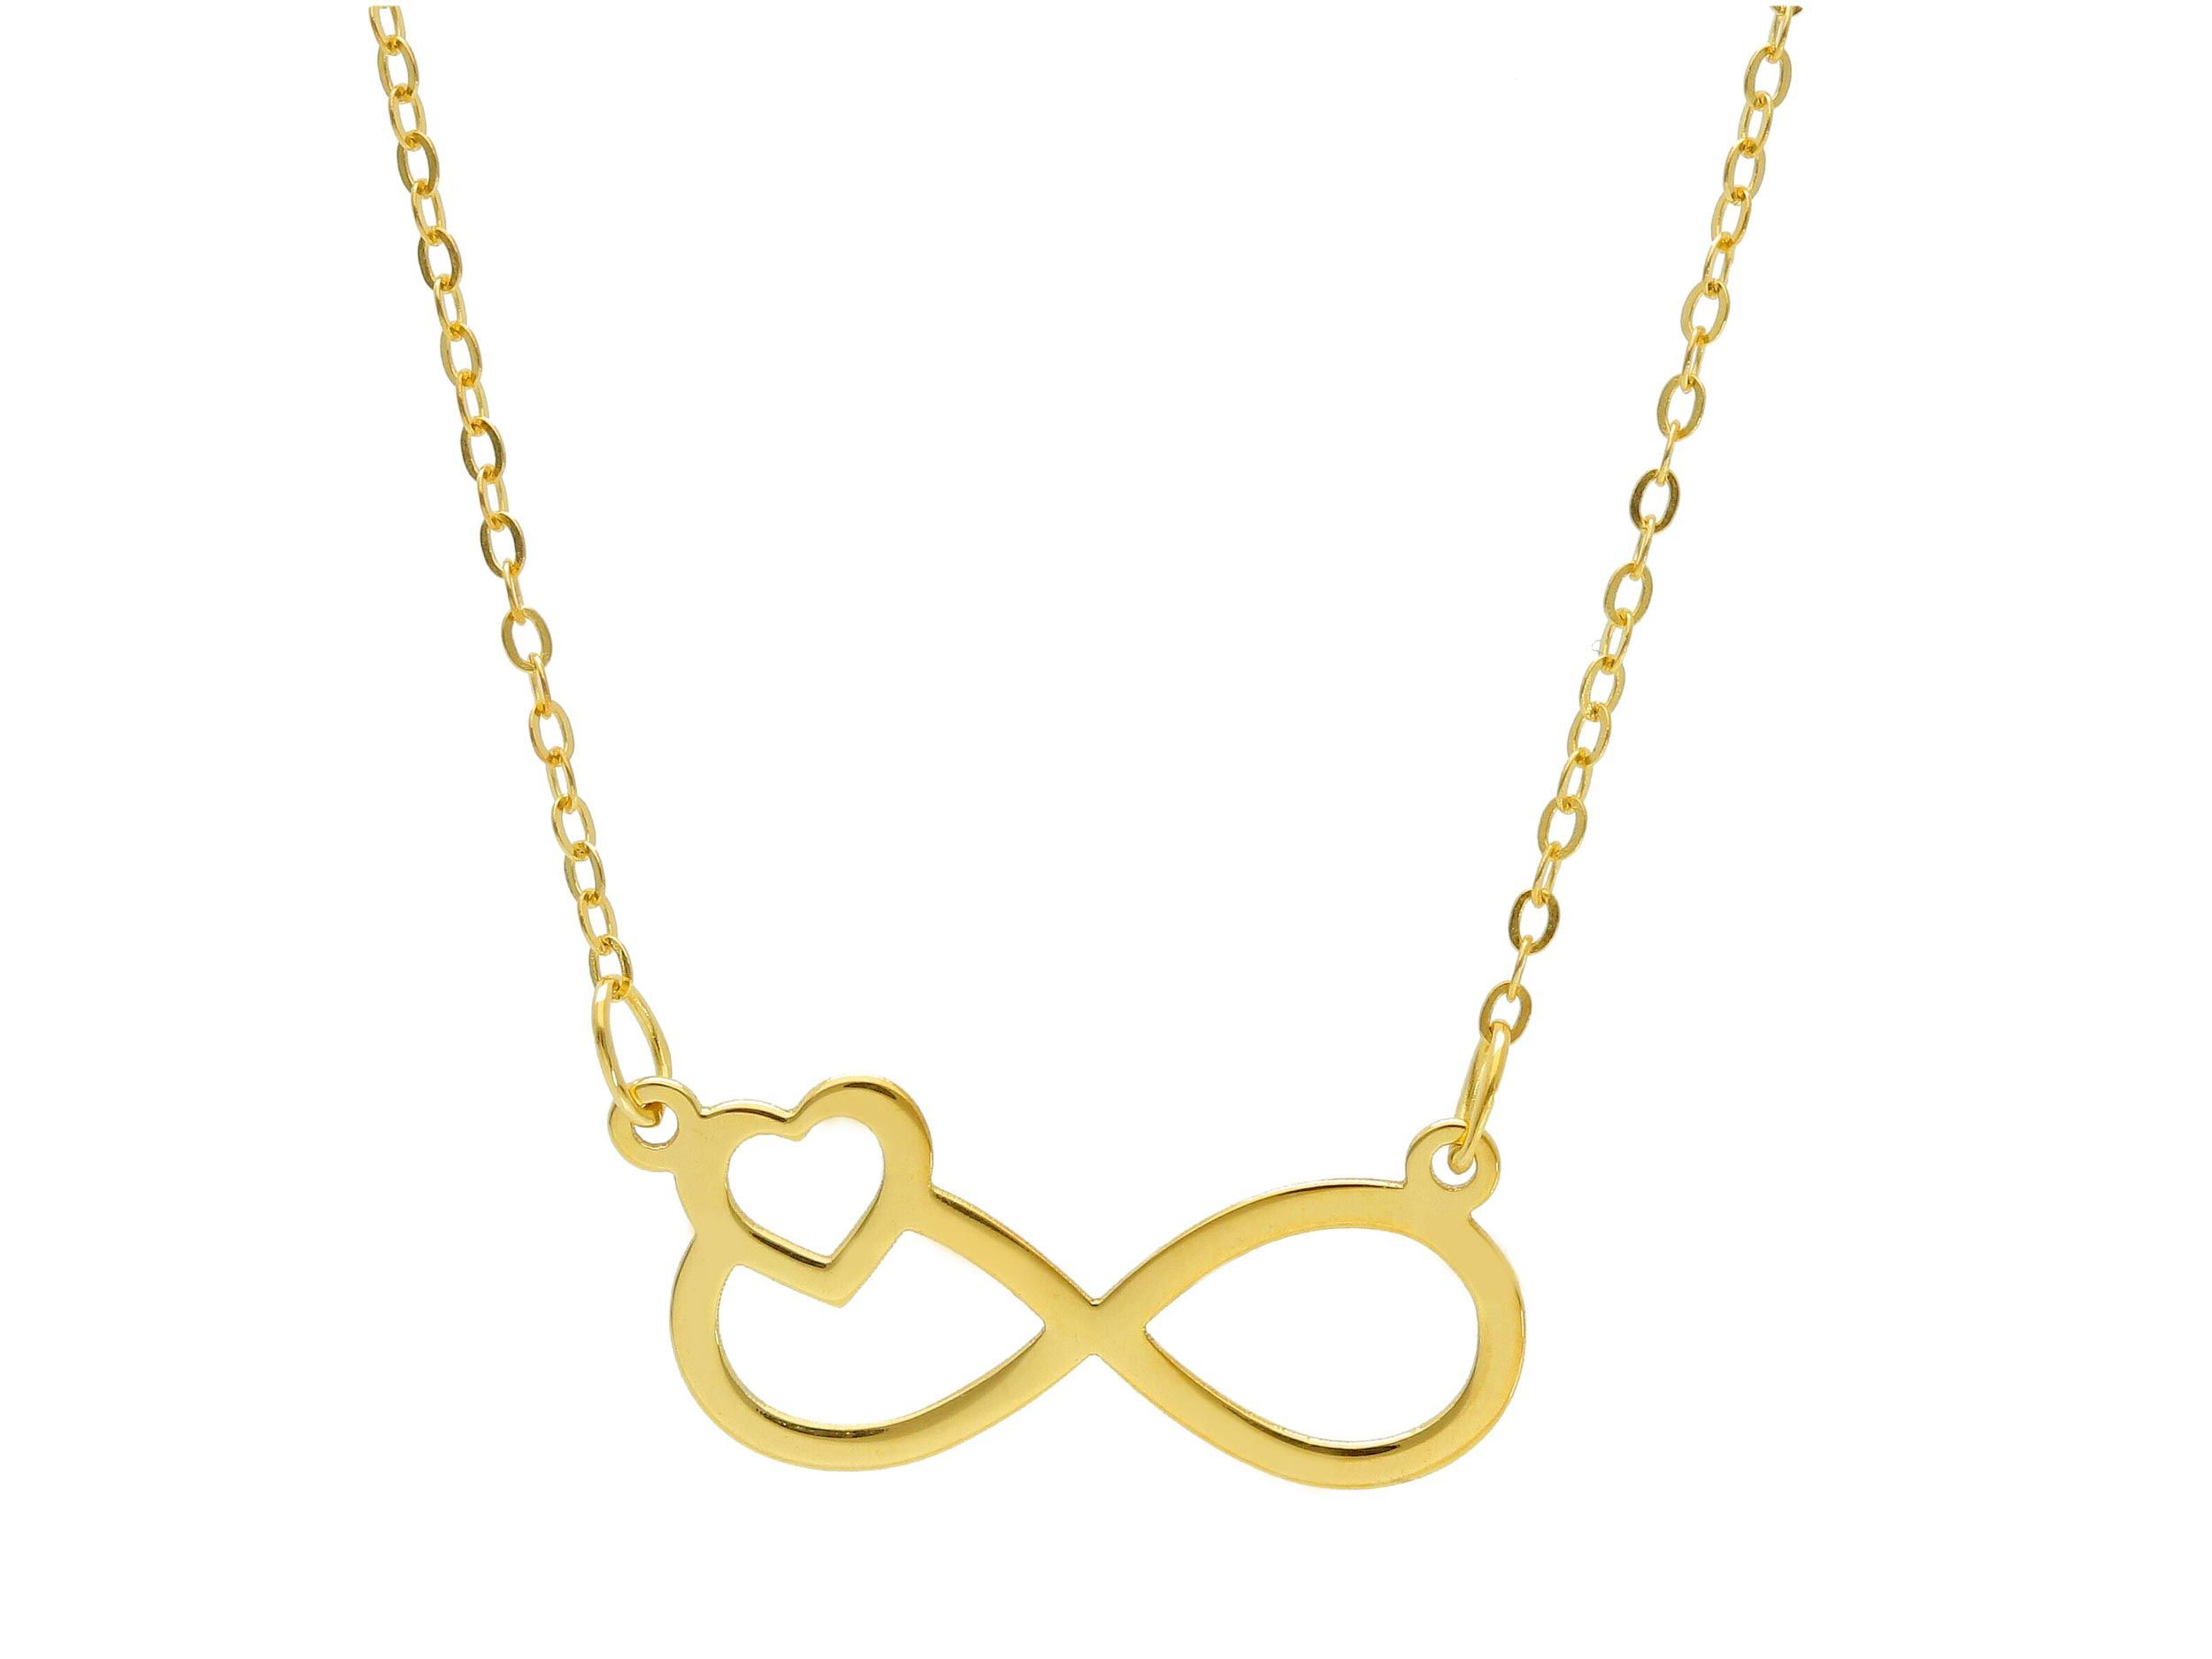 Golden necklace with the infinity symbol k9 (code S249394)